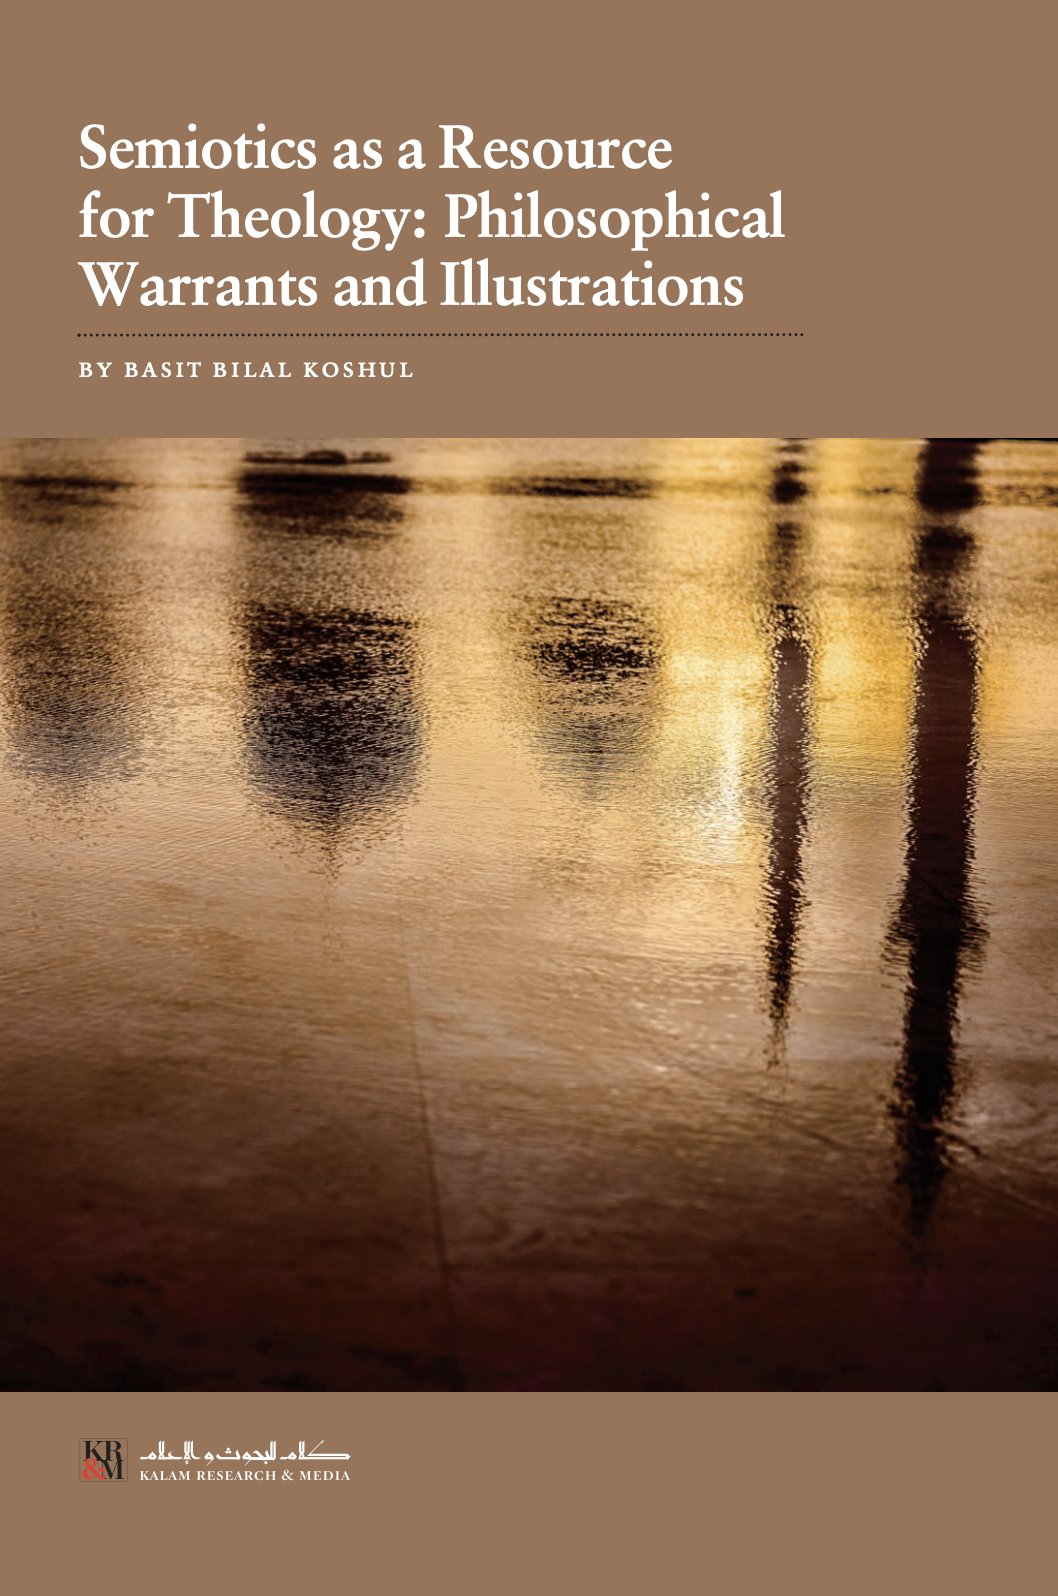 Semiotics as a Resource for Theology: Philosophical Warrants and Illustrations